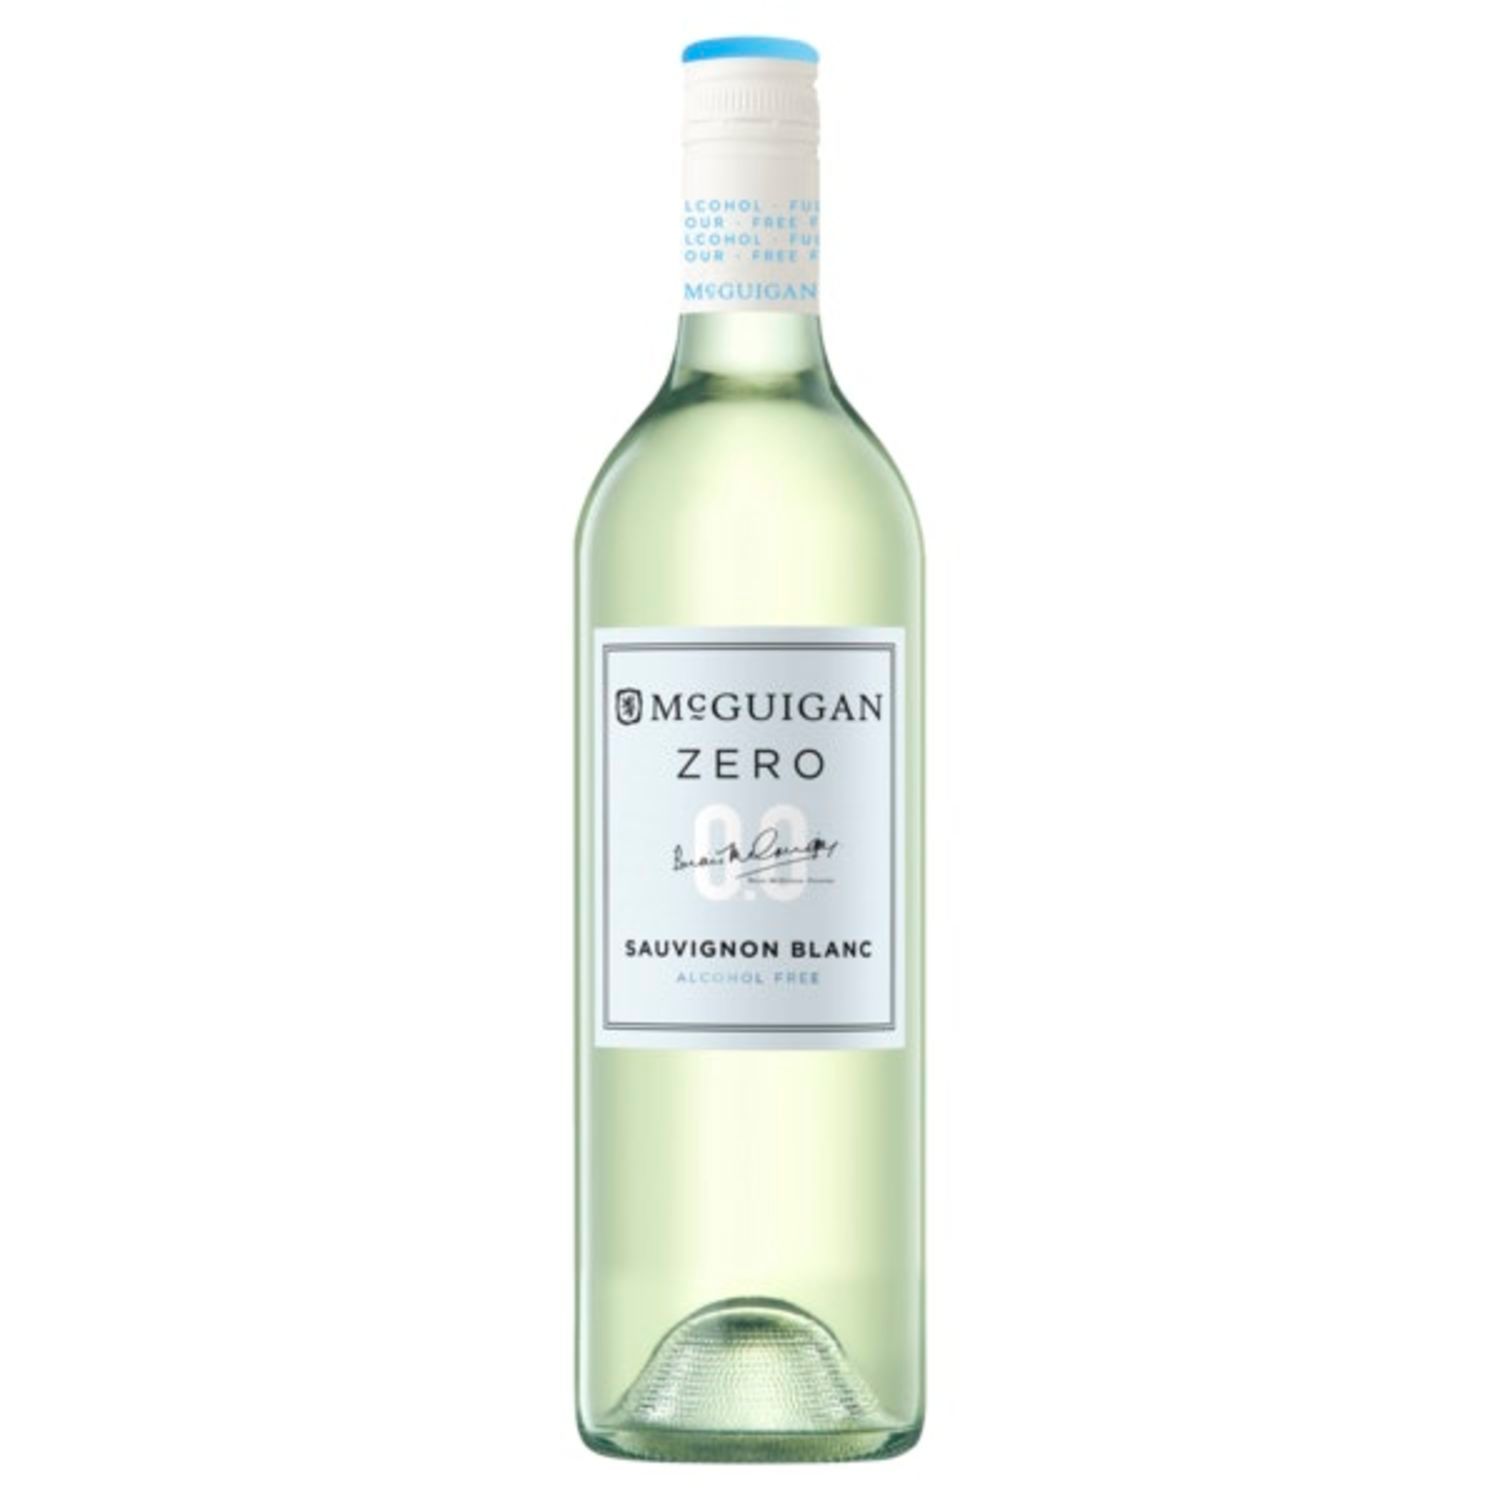 McGuigan Wines have now included these alcohol free wines into their range. Showing tropical fruits and a light citrus nose that flows to a palate that is enticing, fresh and fruit-driven.<br /> <br />Alcohol Volume: 0.00%<br /><br />Pack Format: Bottle<br /><br />Standard Drinks: 0</br /><br />Pack Type: Bottle<br /><br />Country of Origin: Australia<br /><br />Region: South Eastern Australia<br /><br />Vintage: Vintages Vary<br />